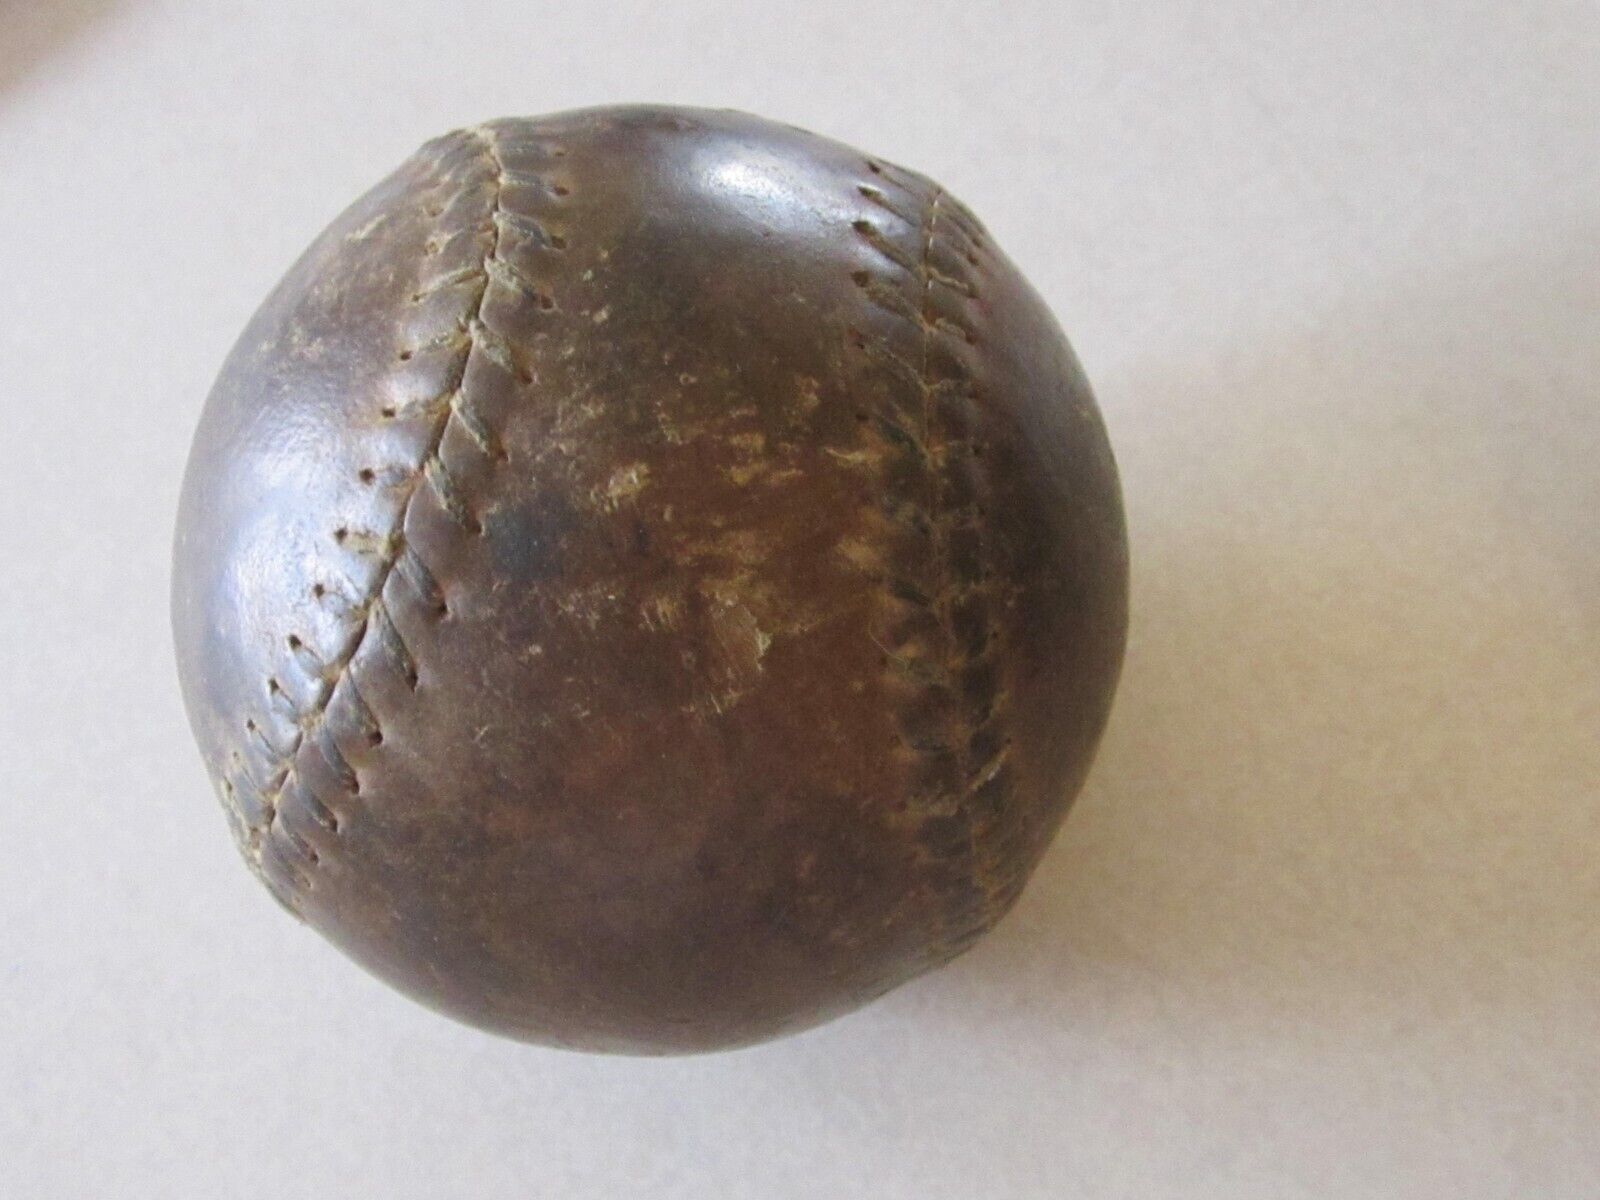 Old Leather Stitched Baseball